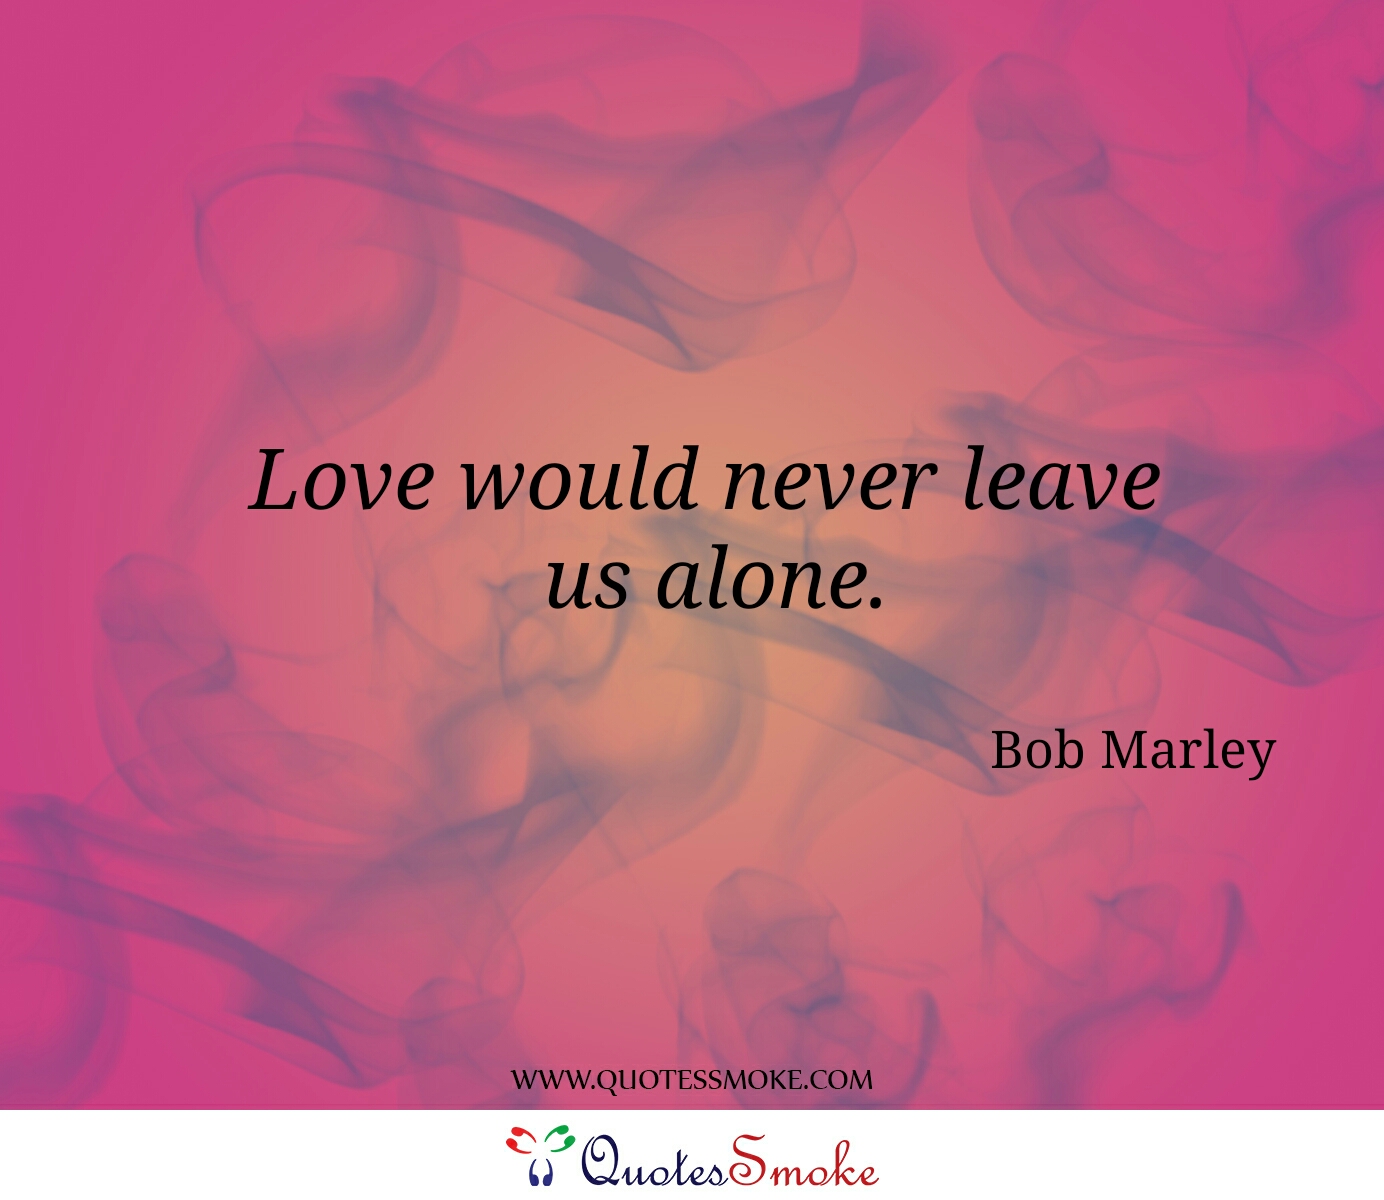 109 Bob Marley Quotes that will Uplift you Thinking 45 Love would never leave us alone